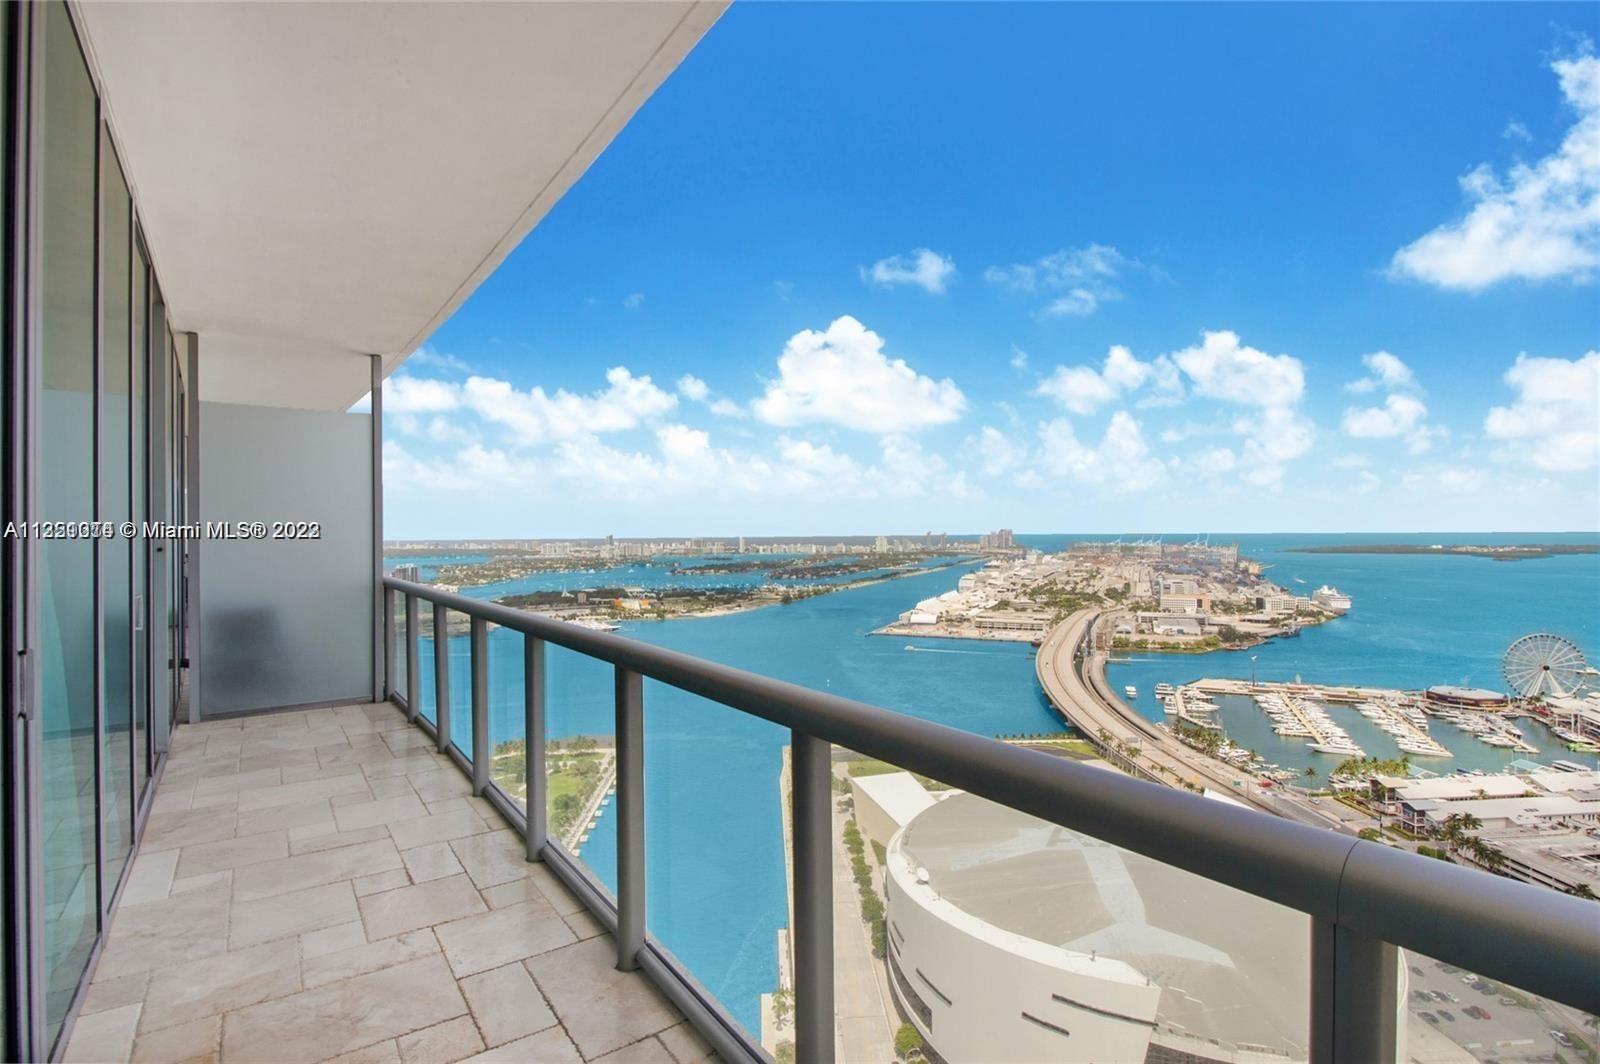 A fantastic unit with stunning and unique direct views of Biscayne Bay. This unit features 2 bedroom